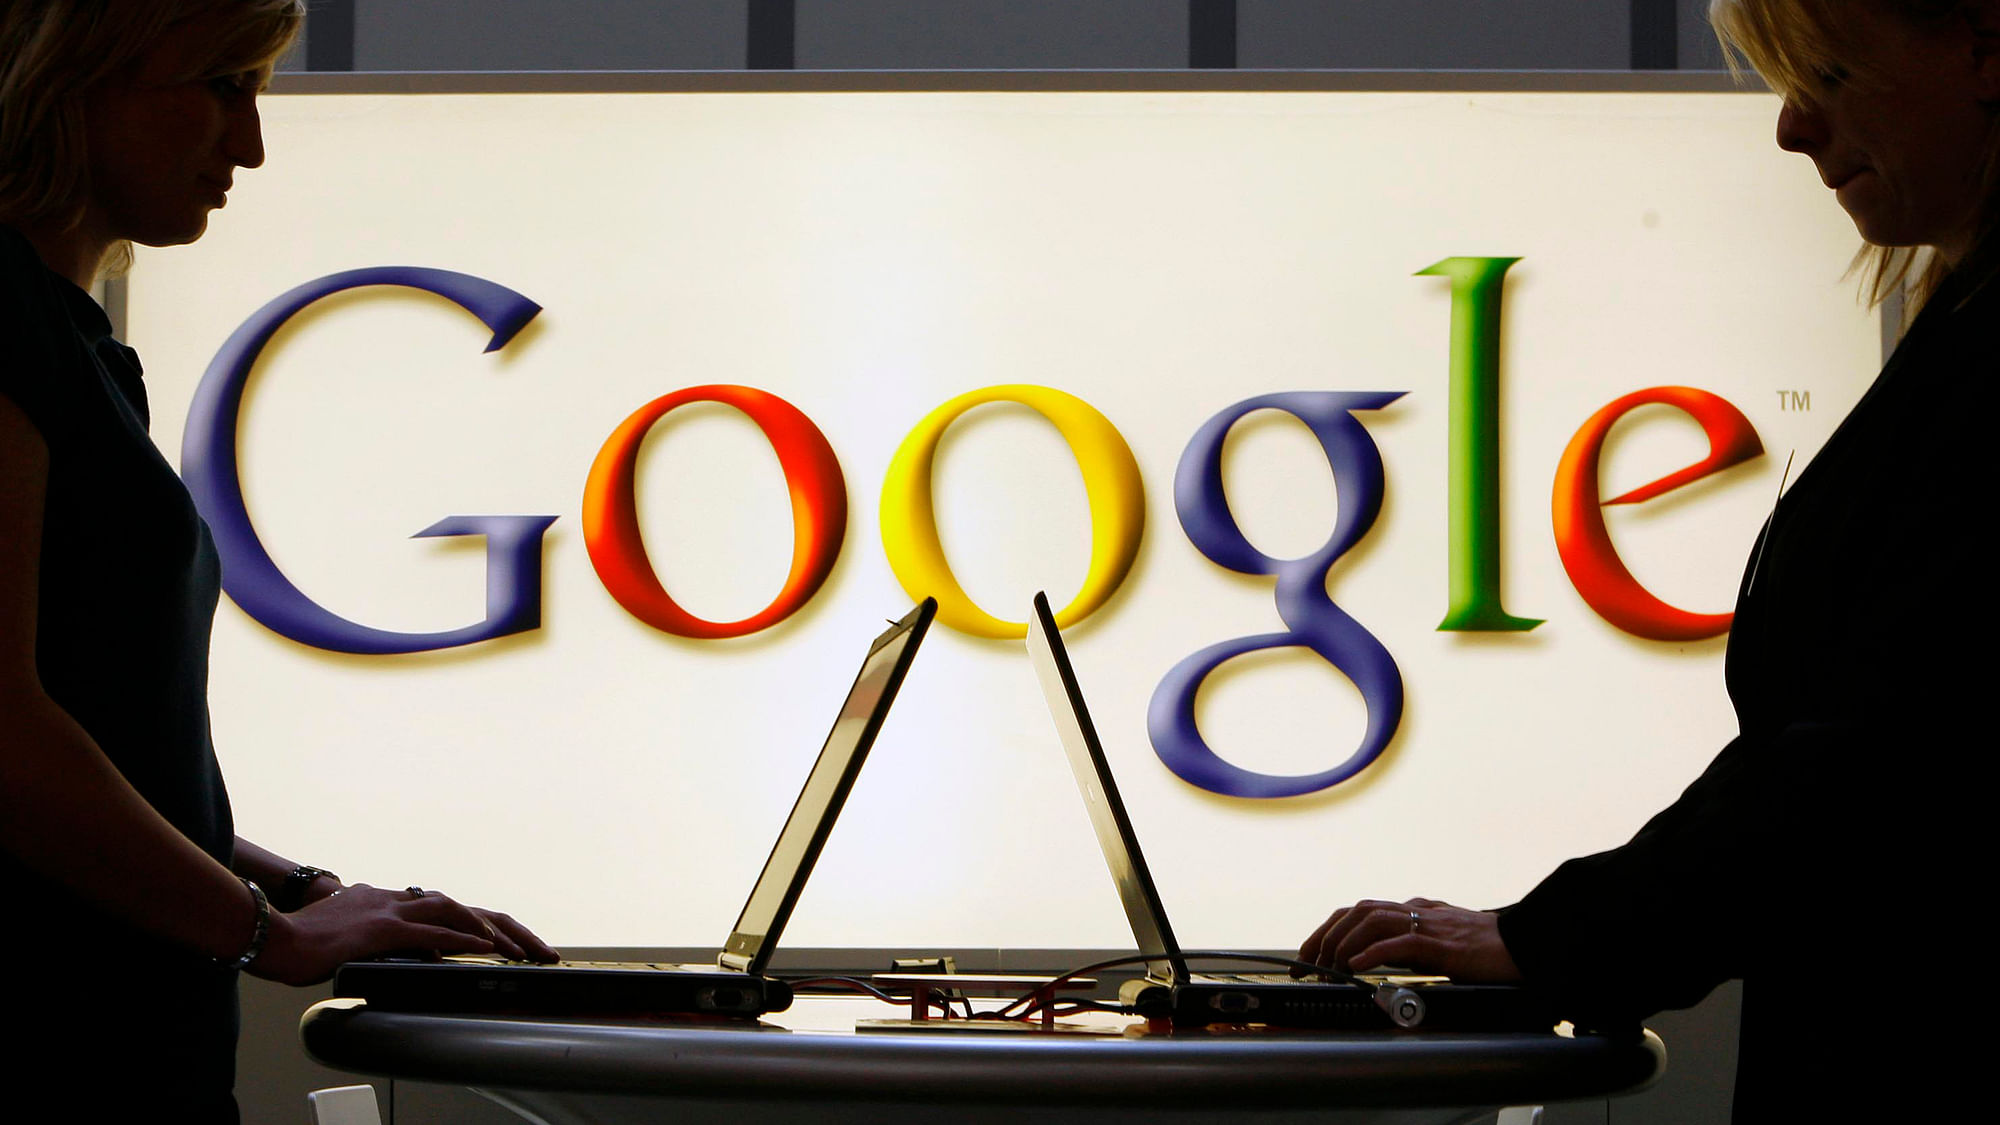 With the COVID-19 pandemic hardly showing any sign of slowing down, Google on Monday said it would allow employees to work from home till the middle of next year if their roles permit.